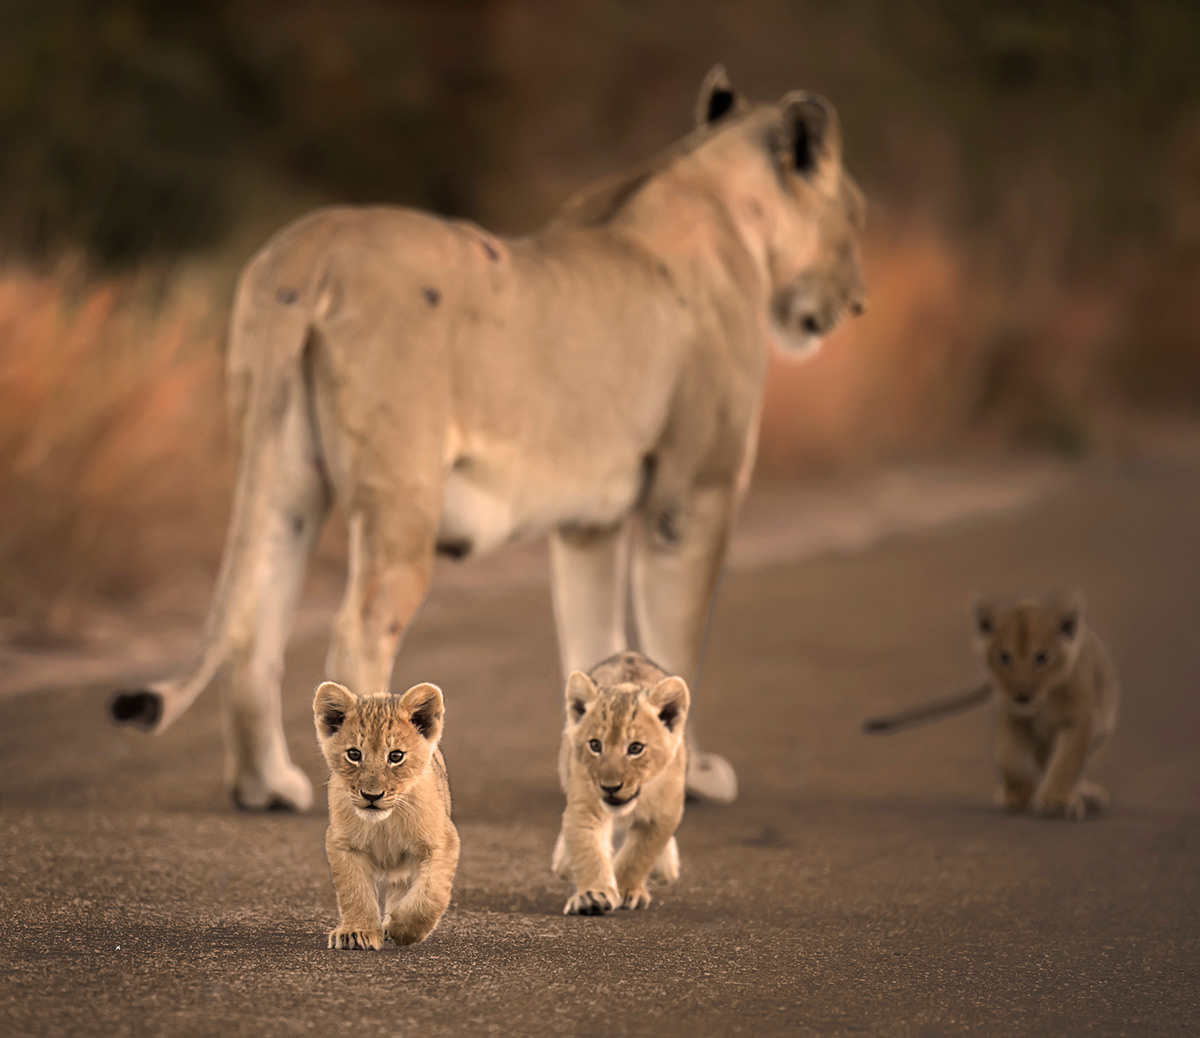 A lioness with her curious cubs in Kruger National Park, South Africa © Licinia Machado